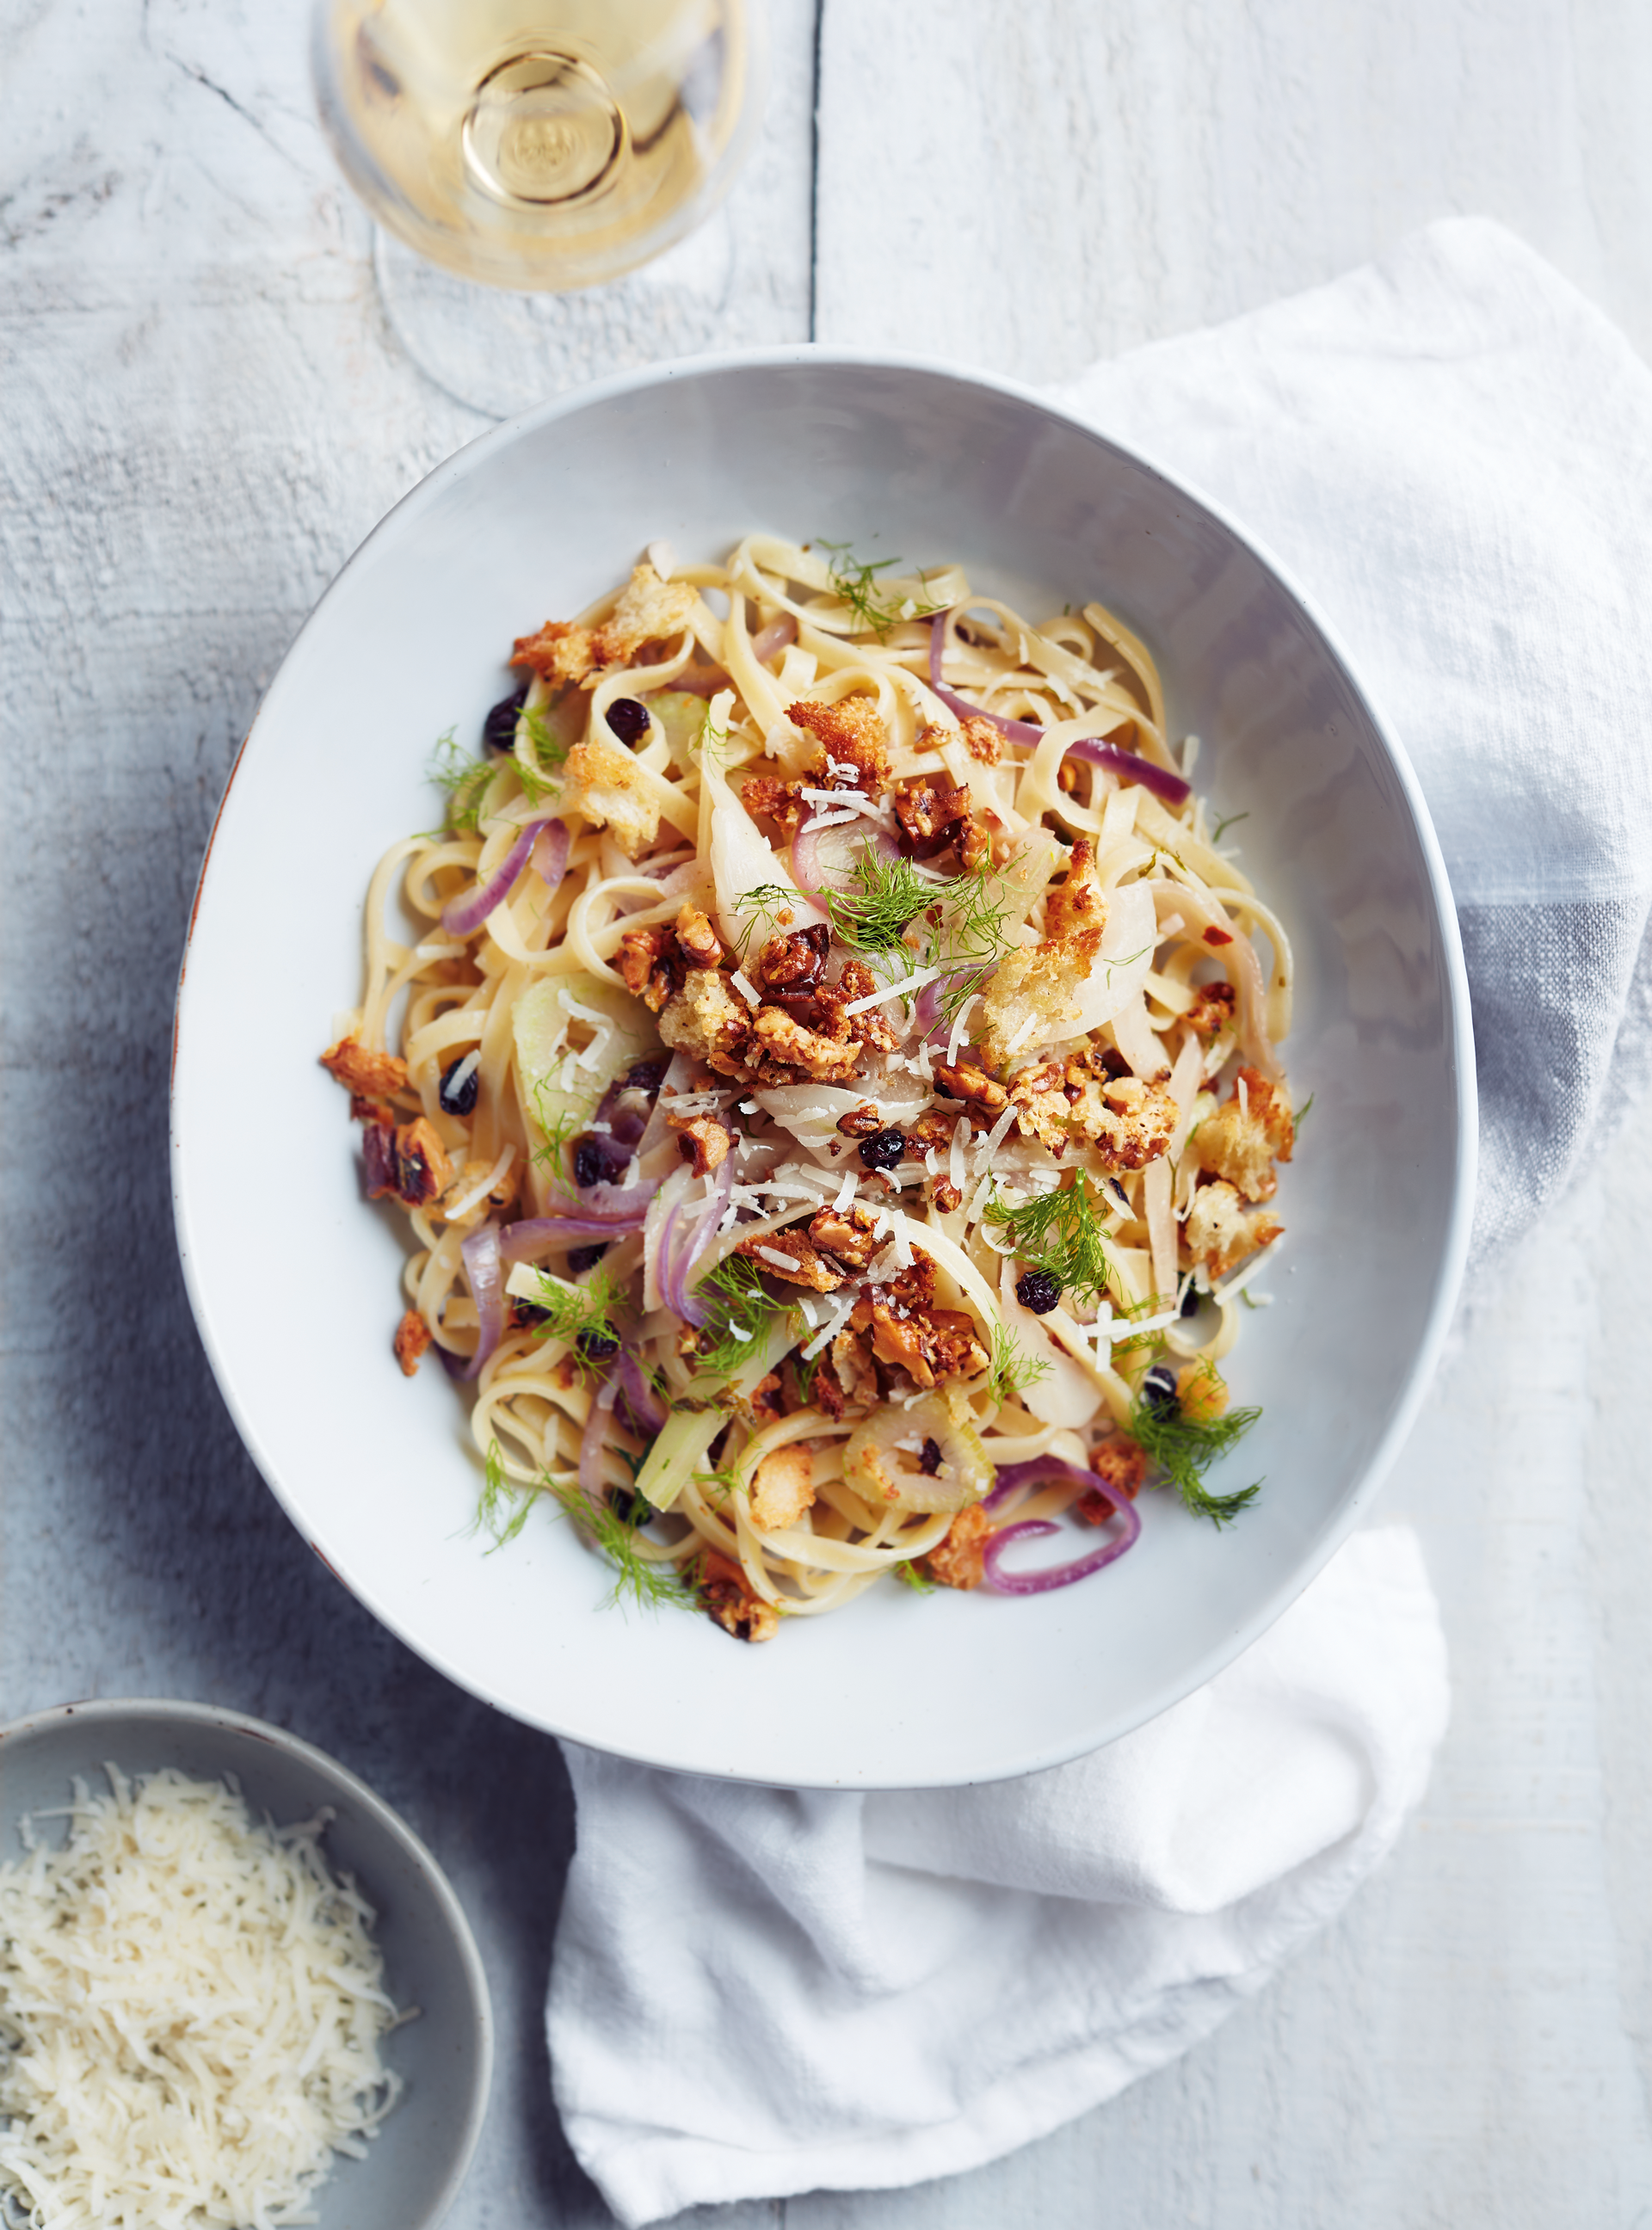 Tagliatelle with Fennel, Dried Currants and Parmesan Croutons